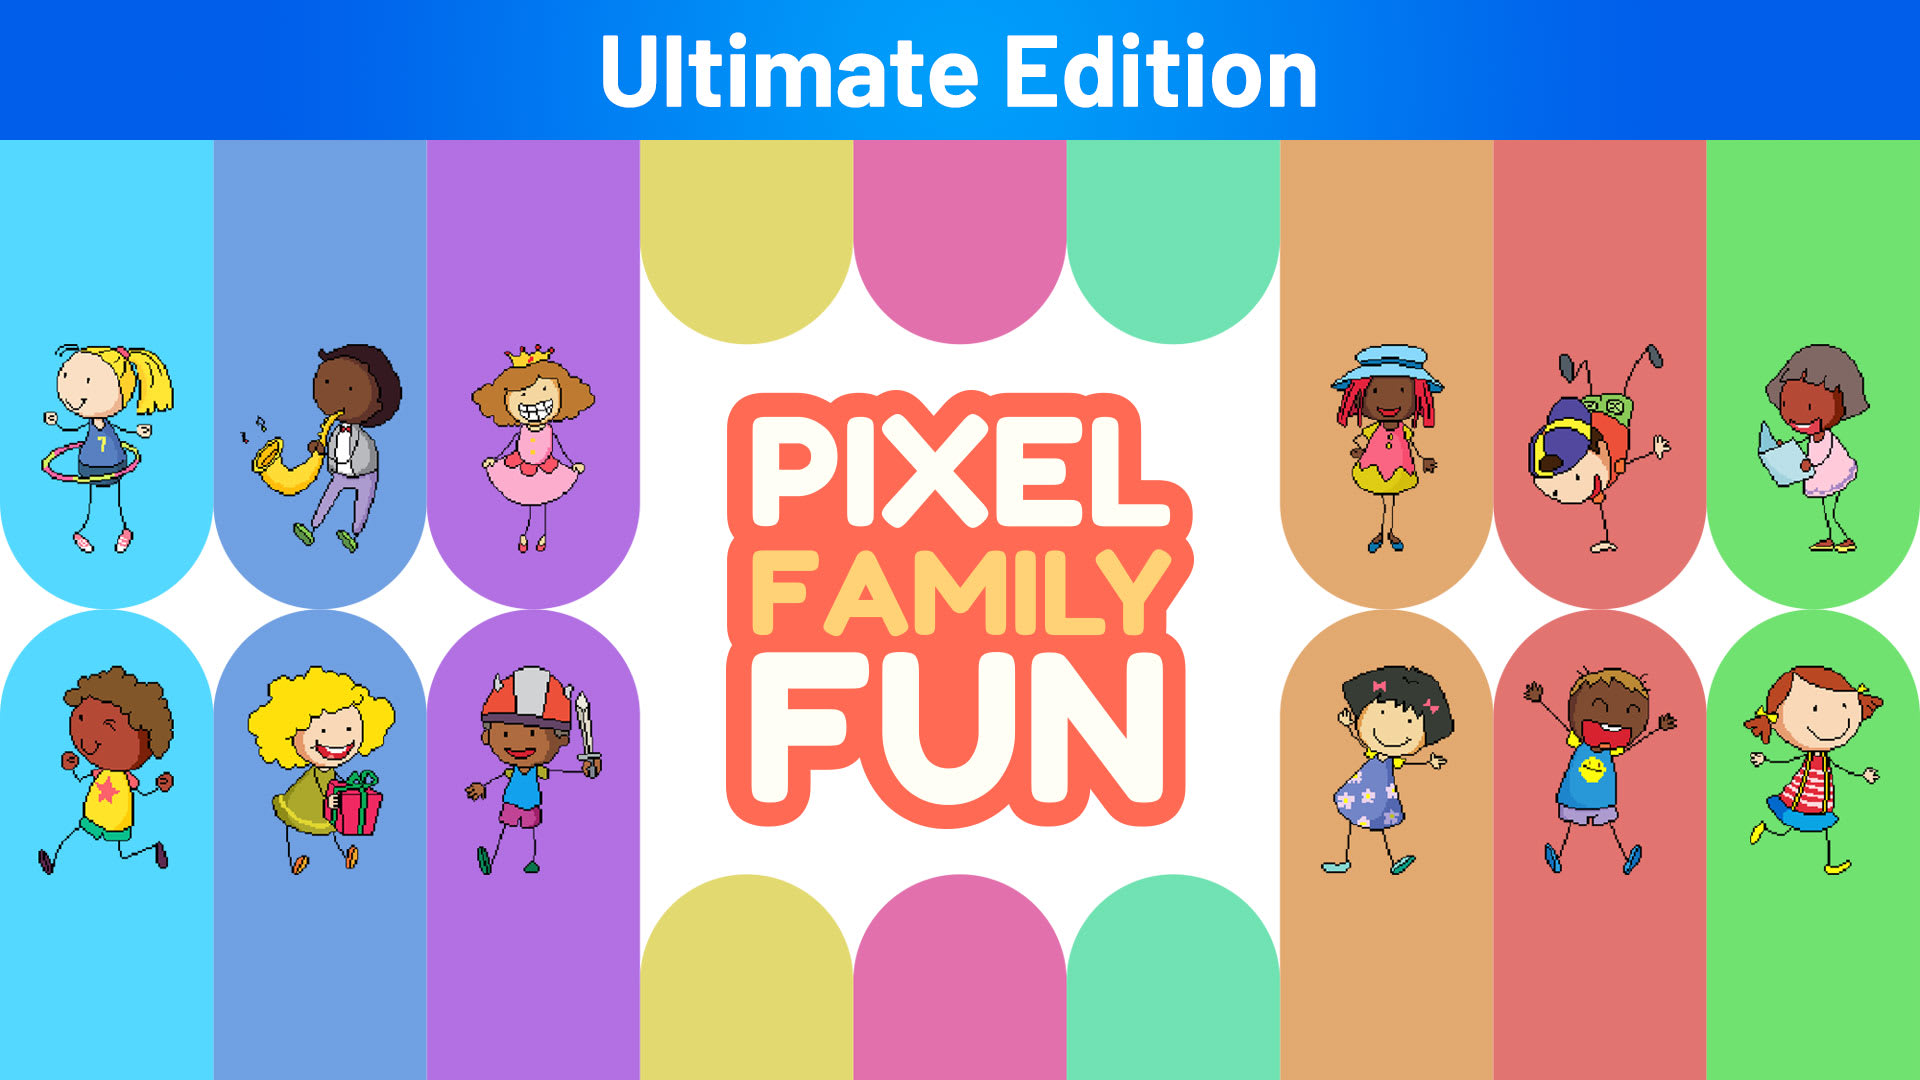 Pixel Family Fun Ultimate Edition